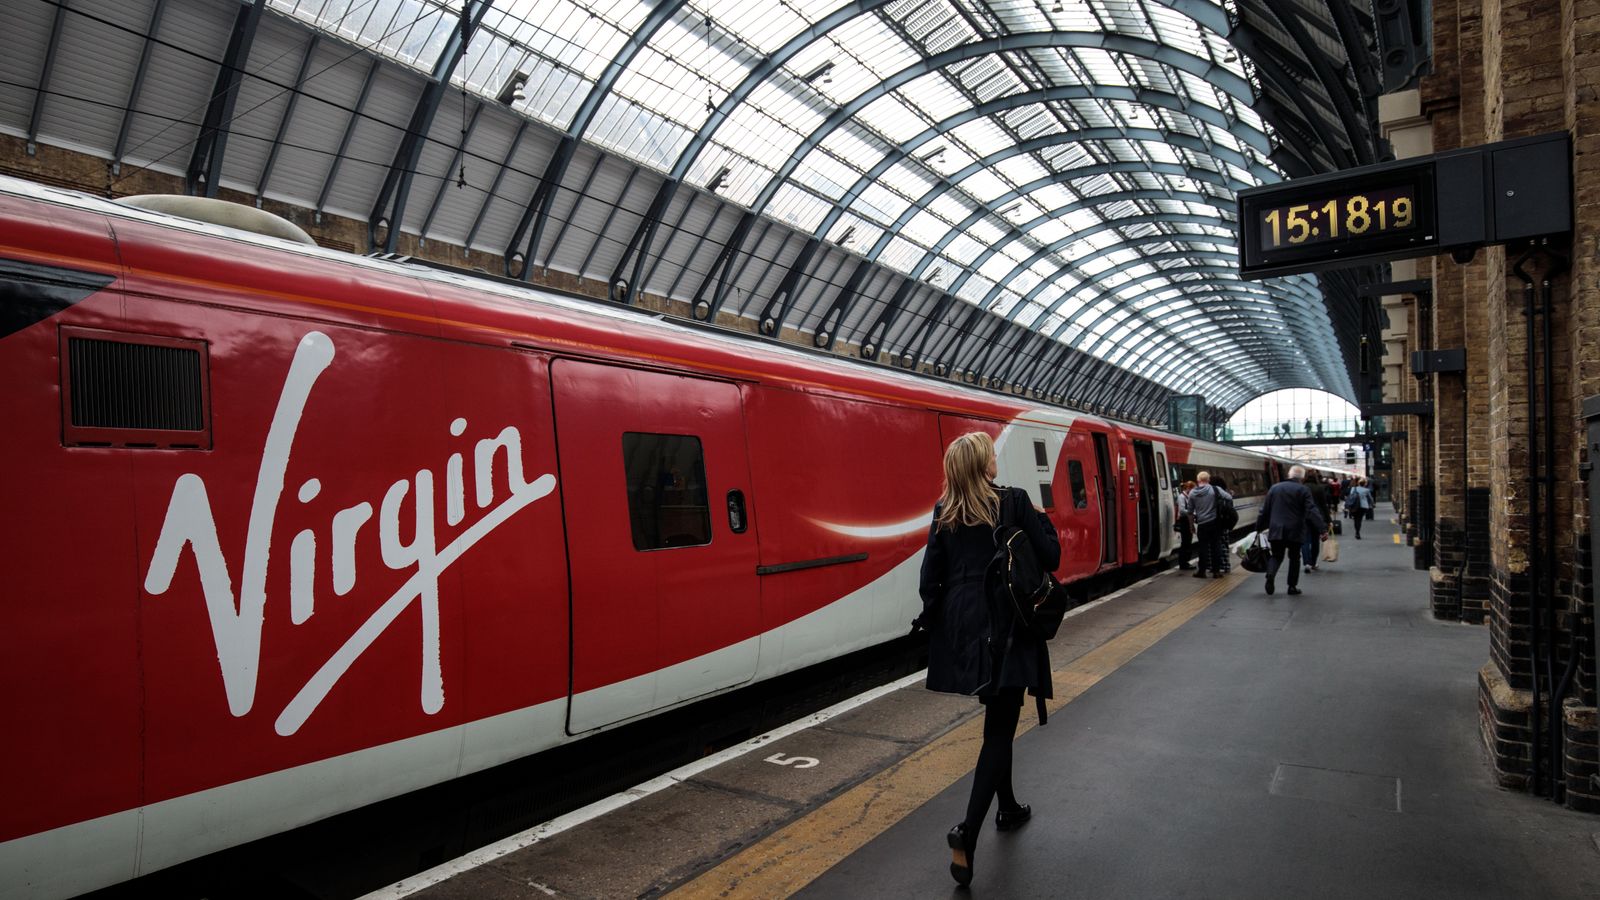 Virgin Trains Virgin Trains Wikipedia Passengers Are Ensconced In